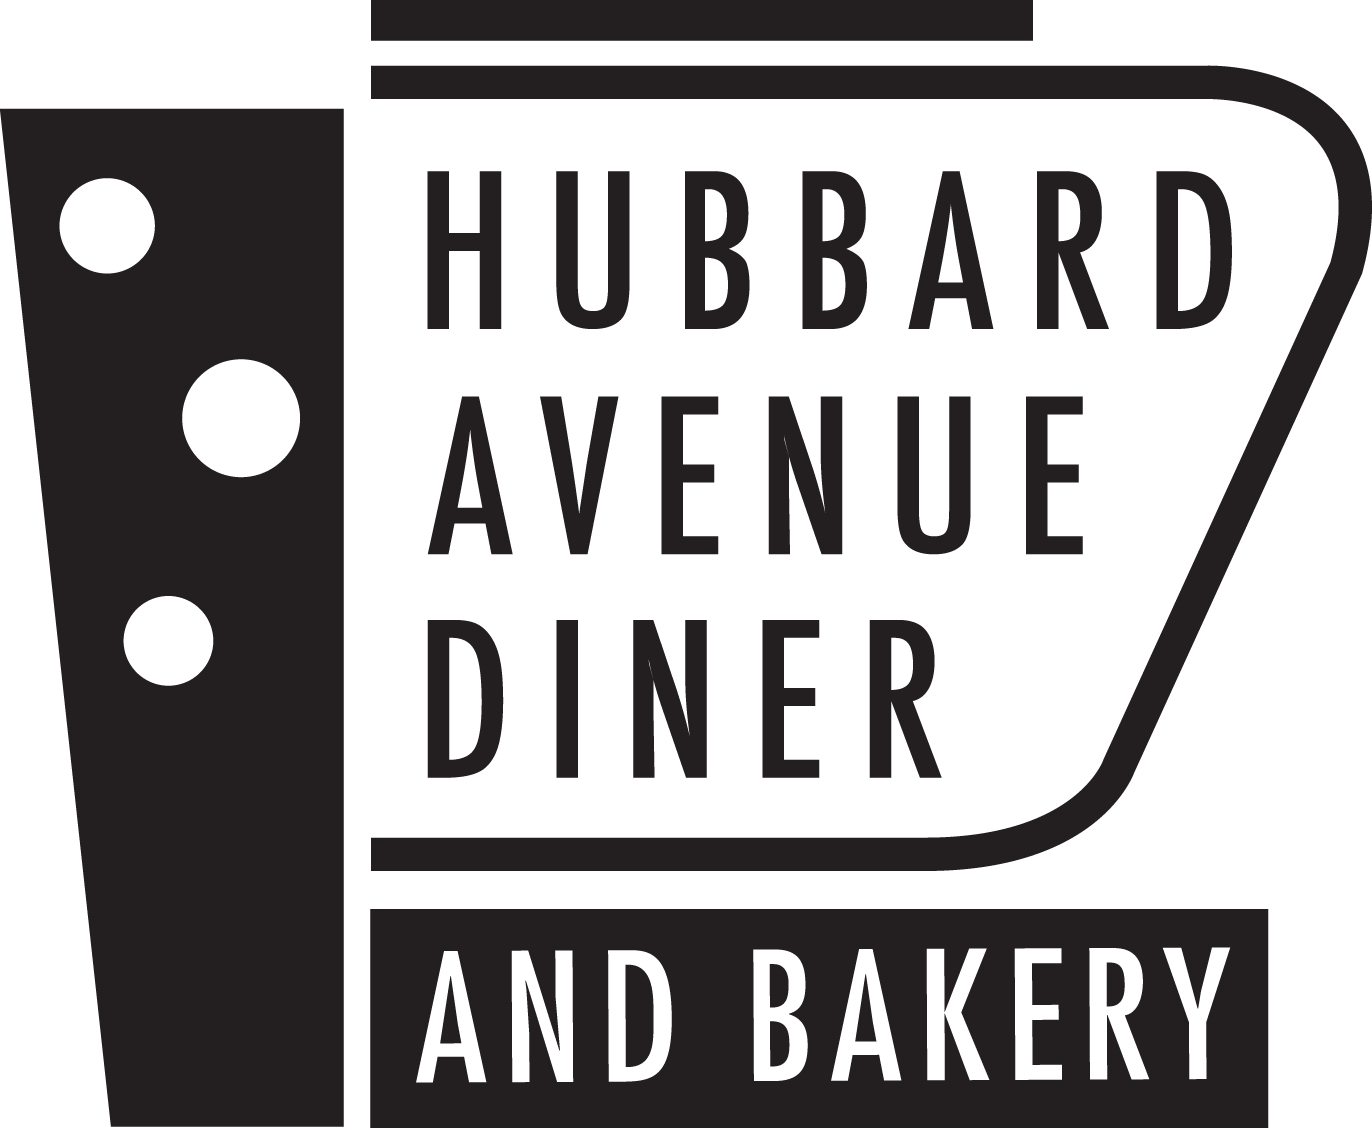 Hubbard Avenue Diner and Bakery